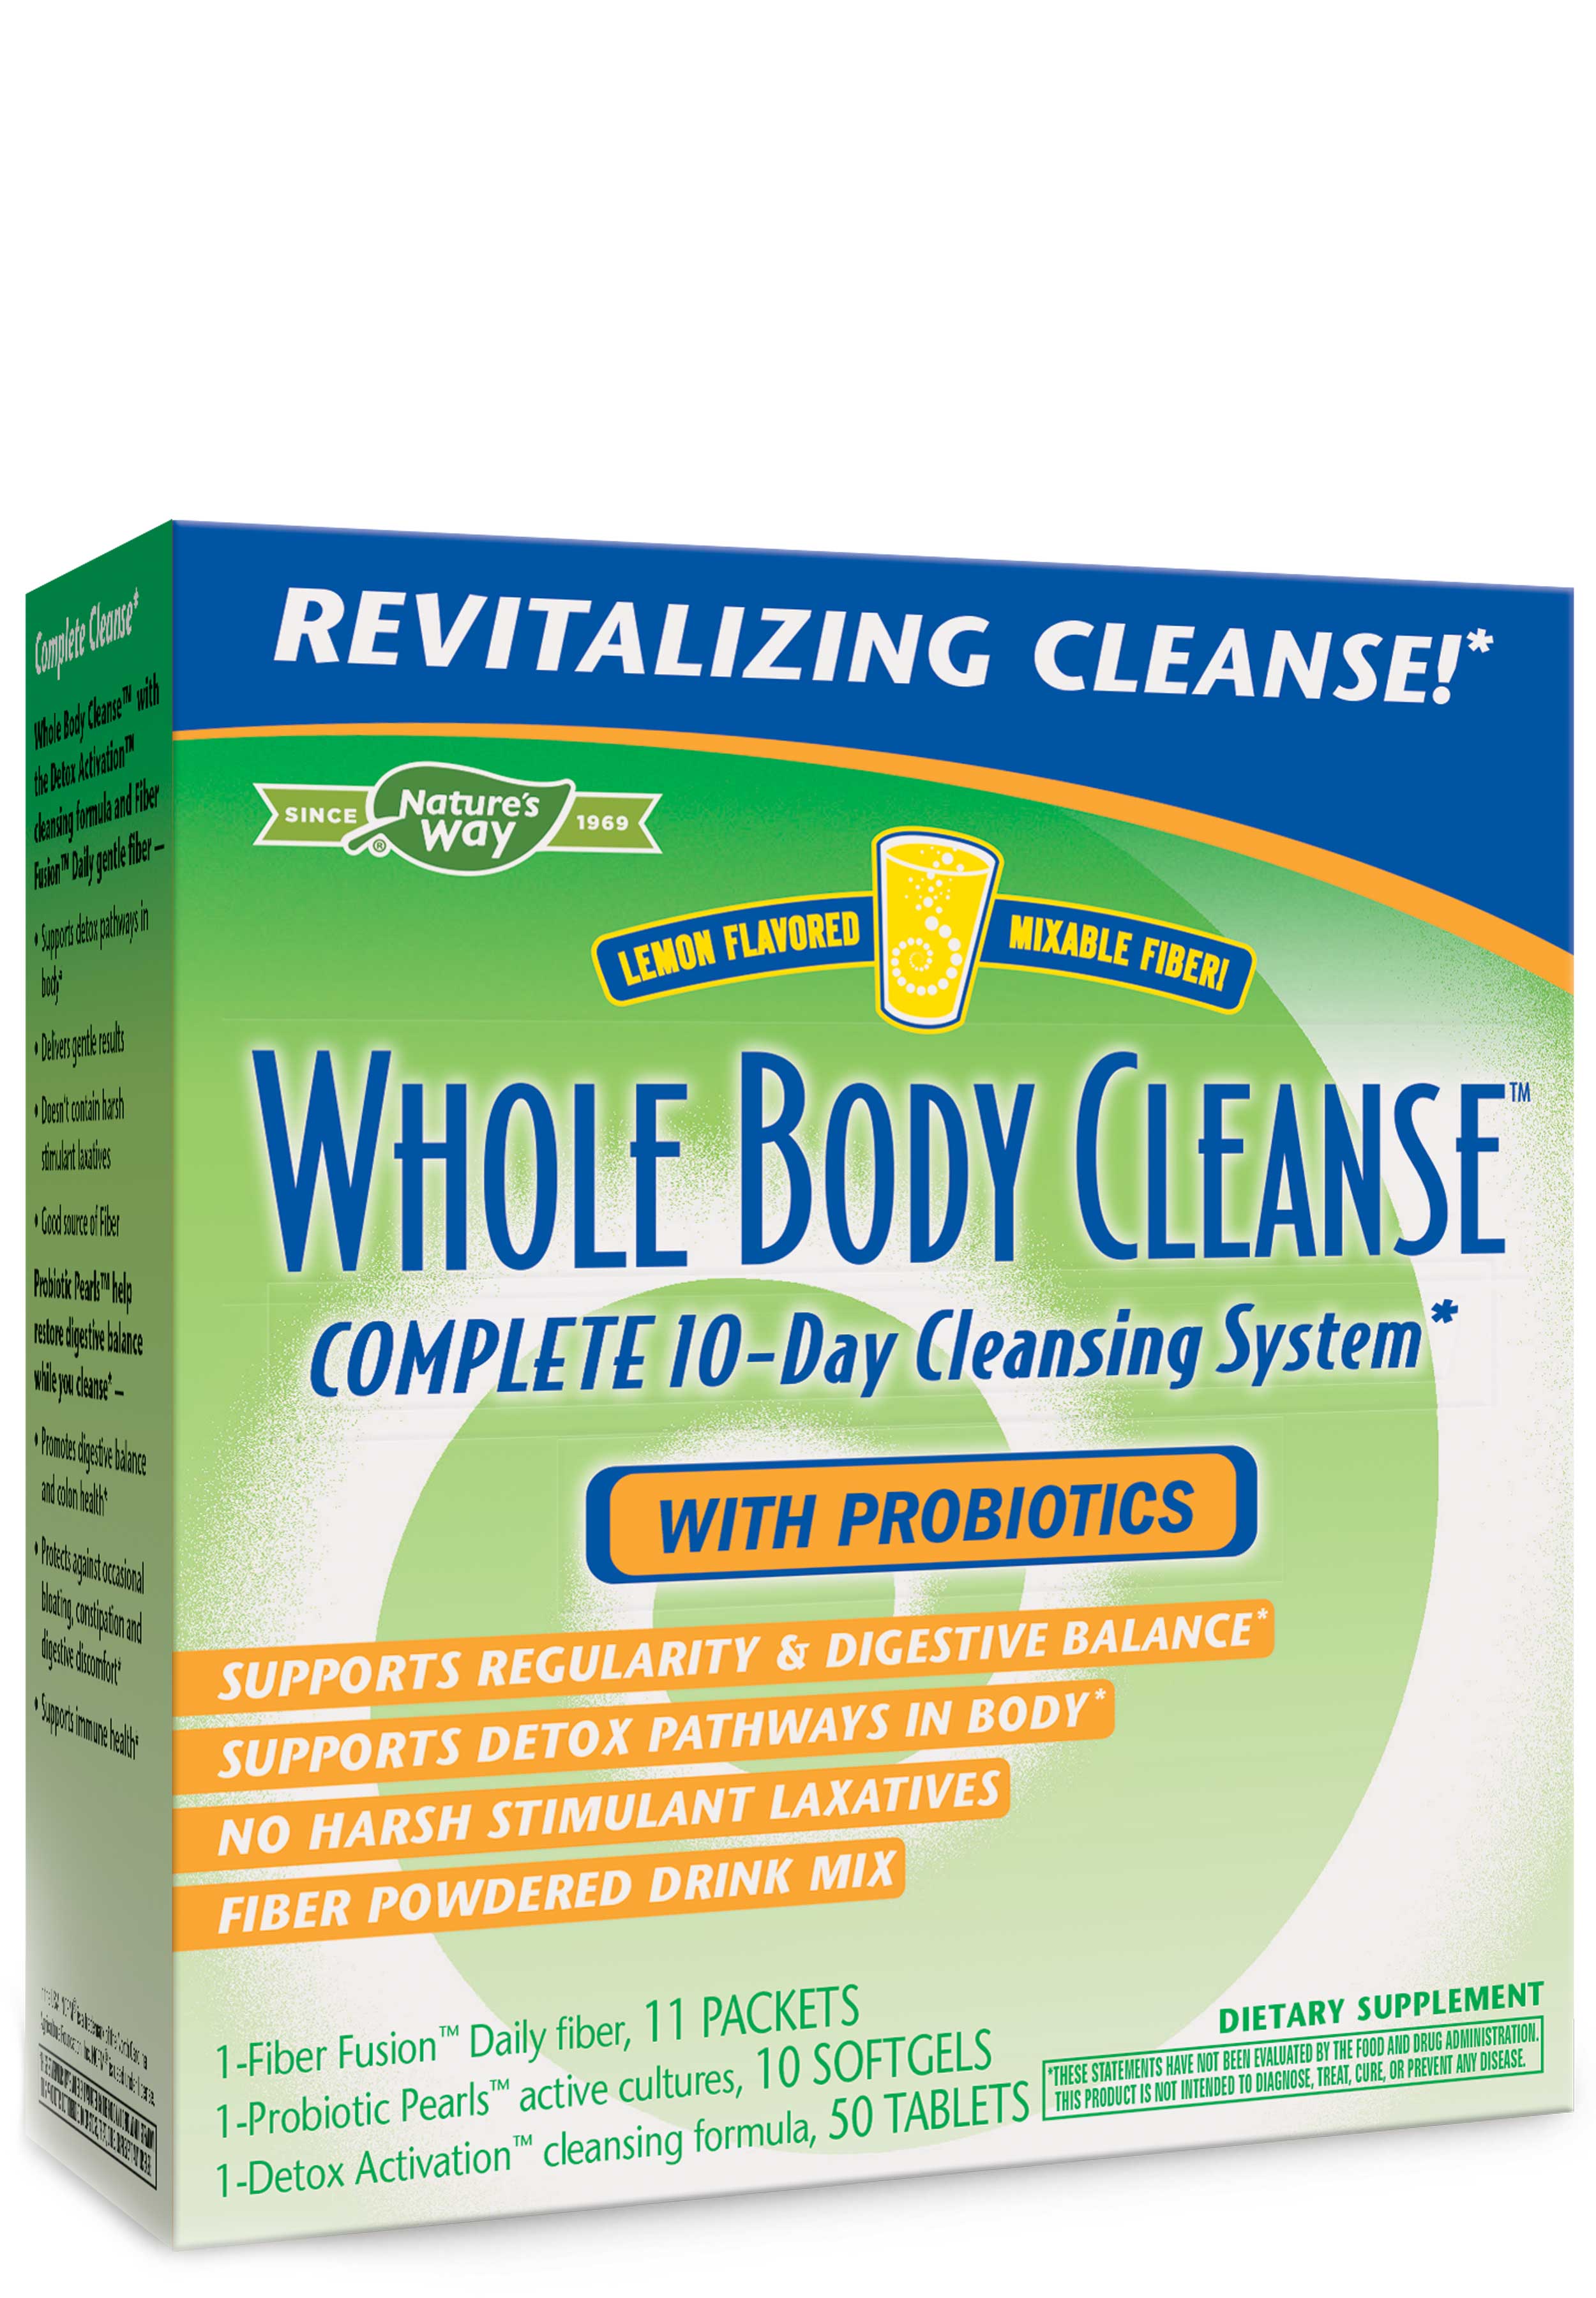 Nature's Way Whole Body Cleanse™ with Drinkable Fiber Kit